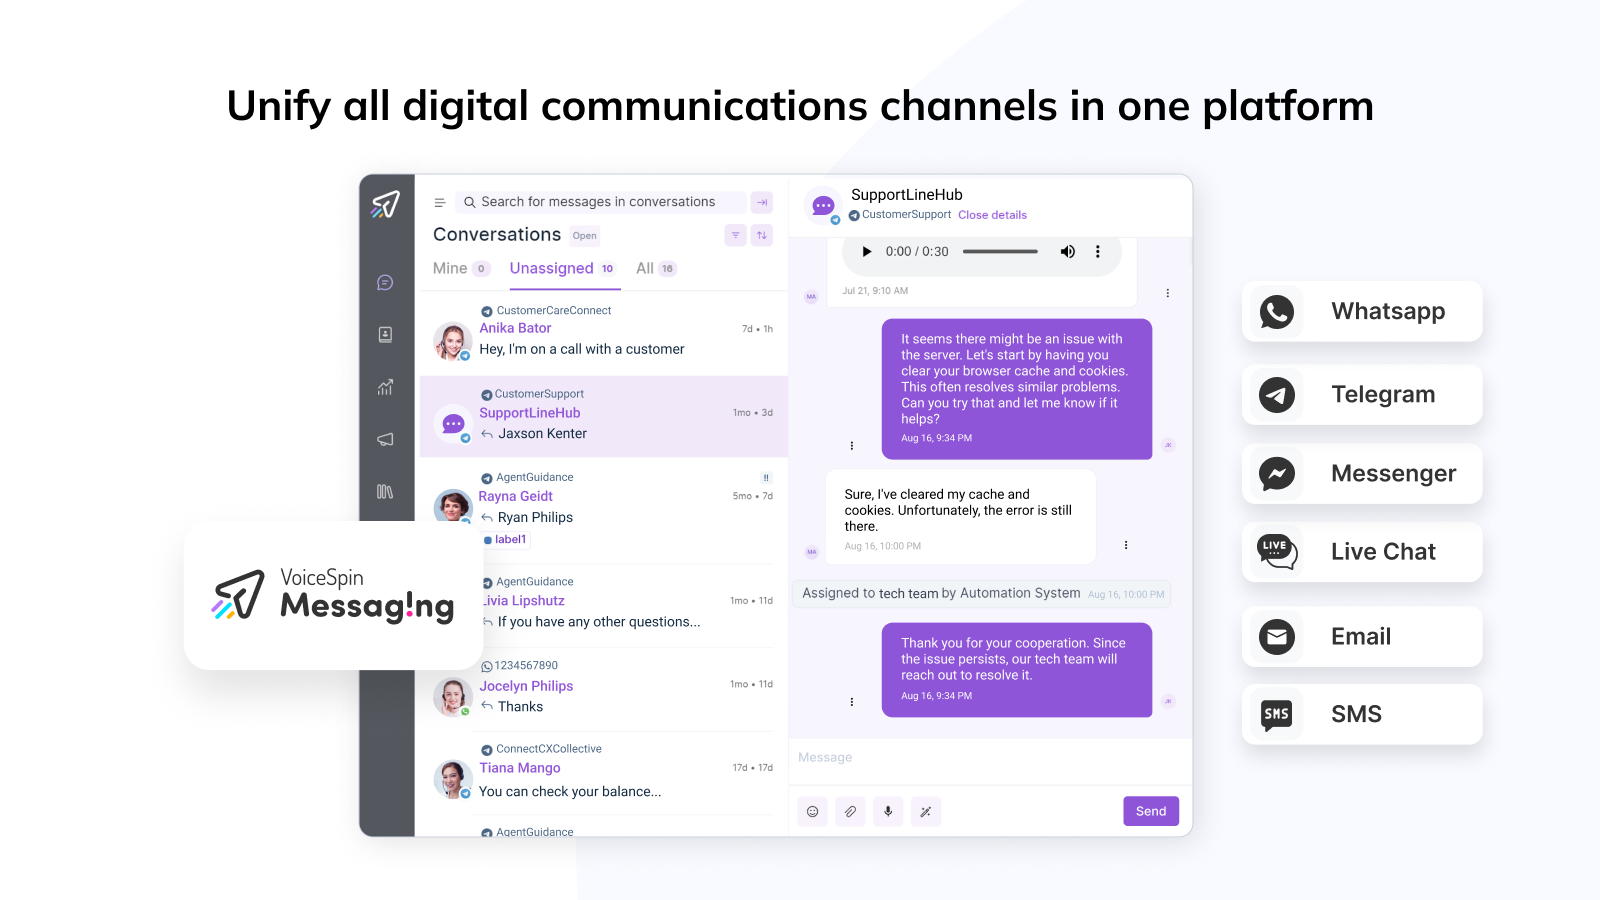 Unify all digital communications channels in one platform